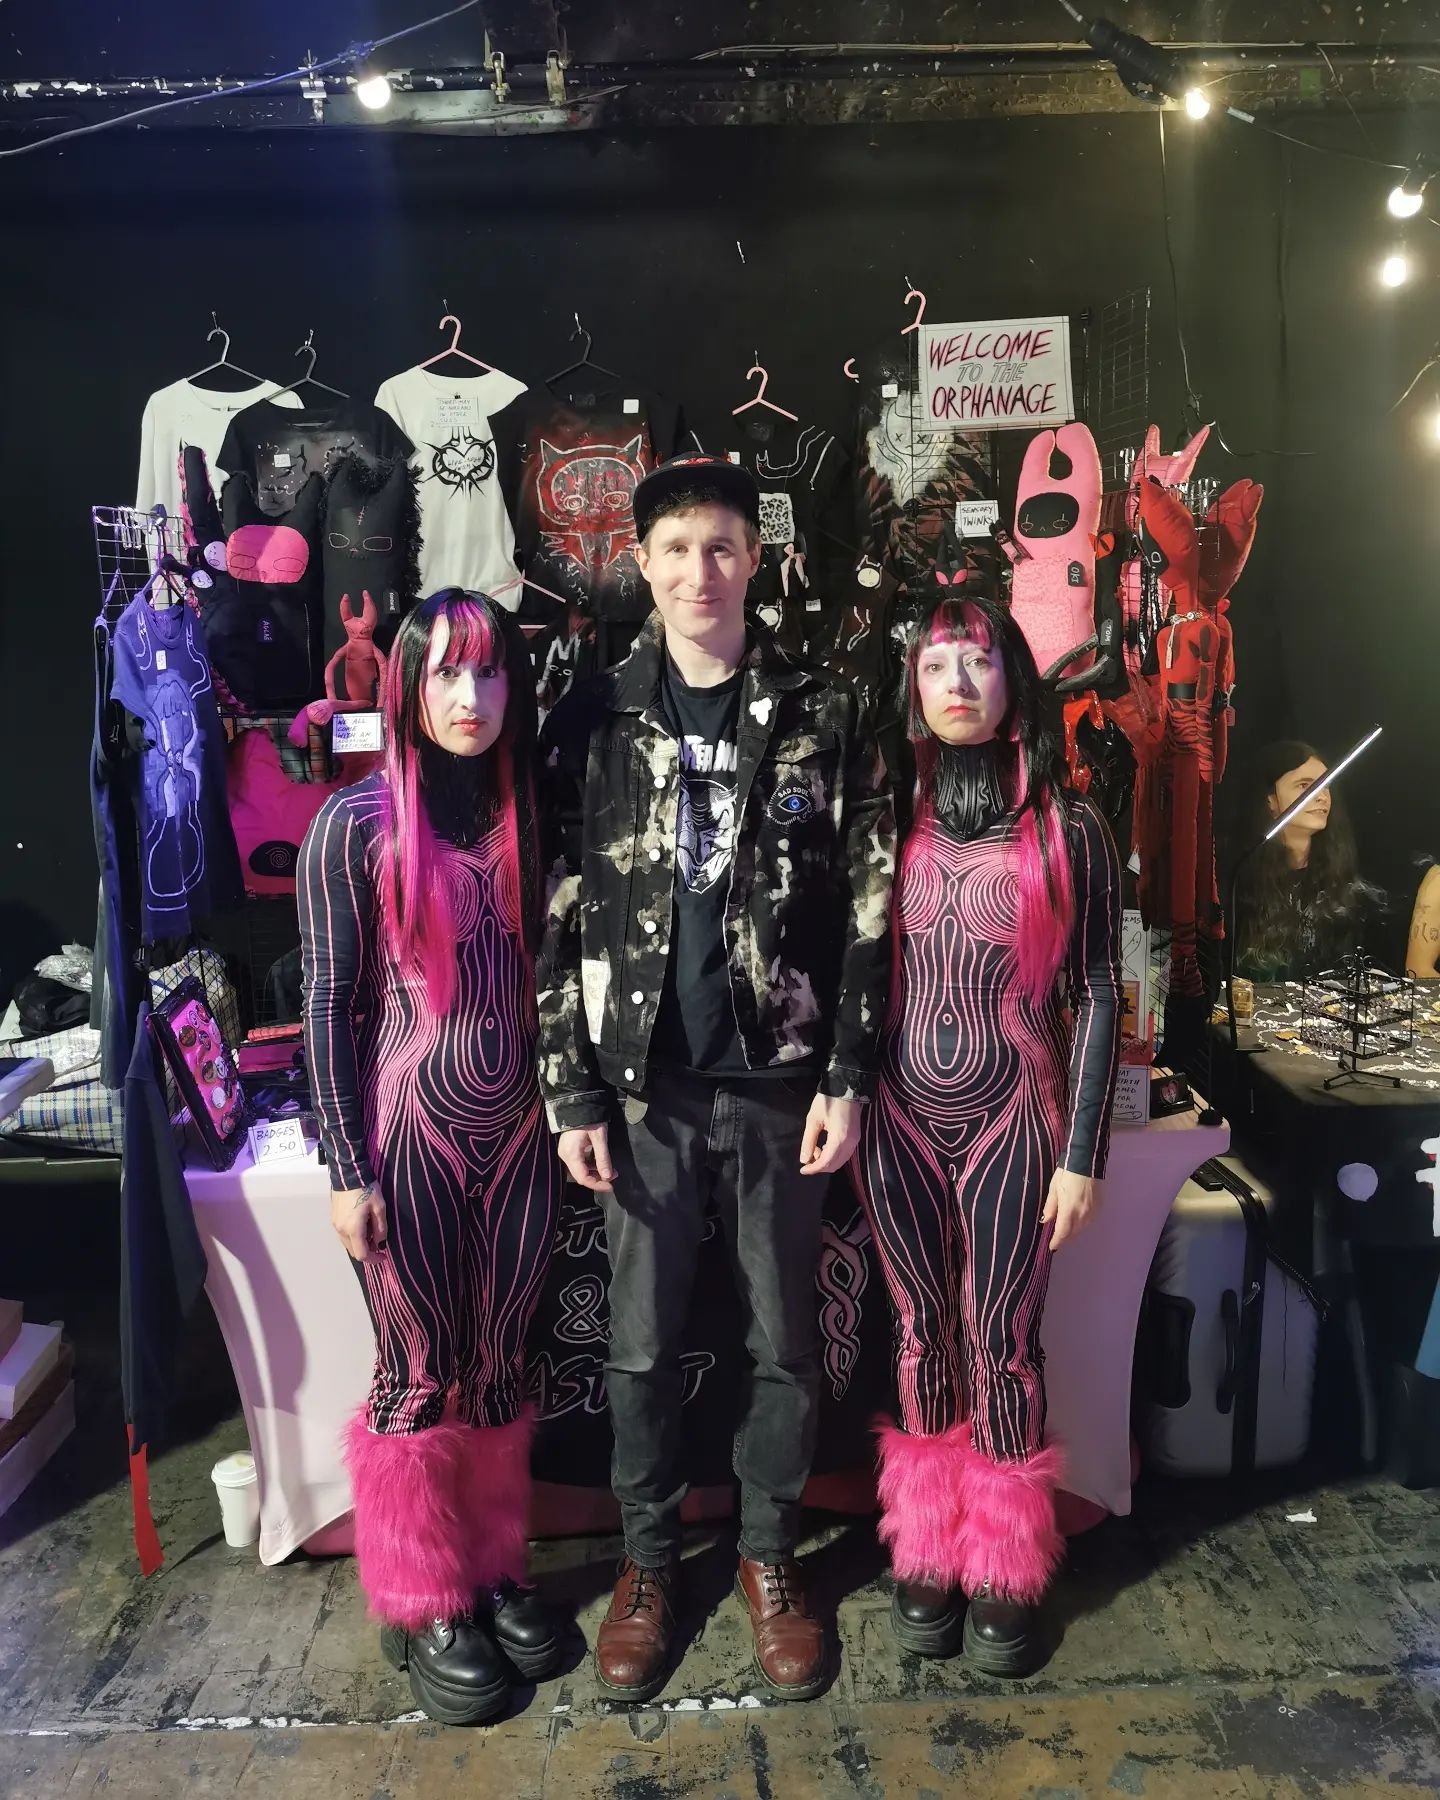 Us with some of the gorgeous gorgeous beings at @satanicfleamarket last week 💗💋💗 kisses

We got a snap with James @guerrillazoo this time 🖤🎀🖤 thanks to you and @jasonatomic for having us 🙏 we love to make twin trouble everytime

We meet so man